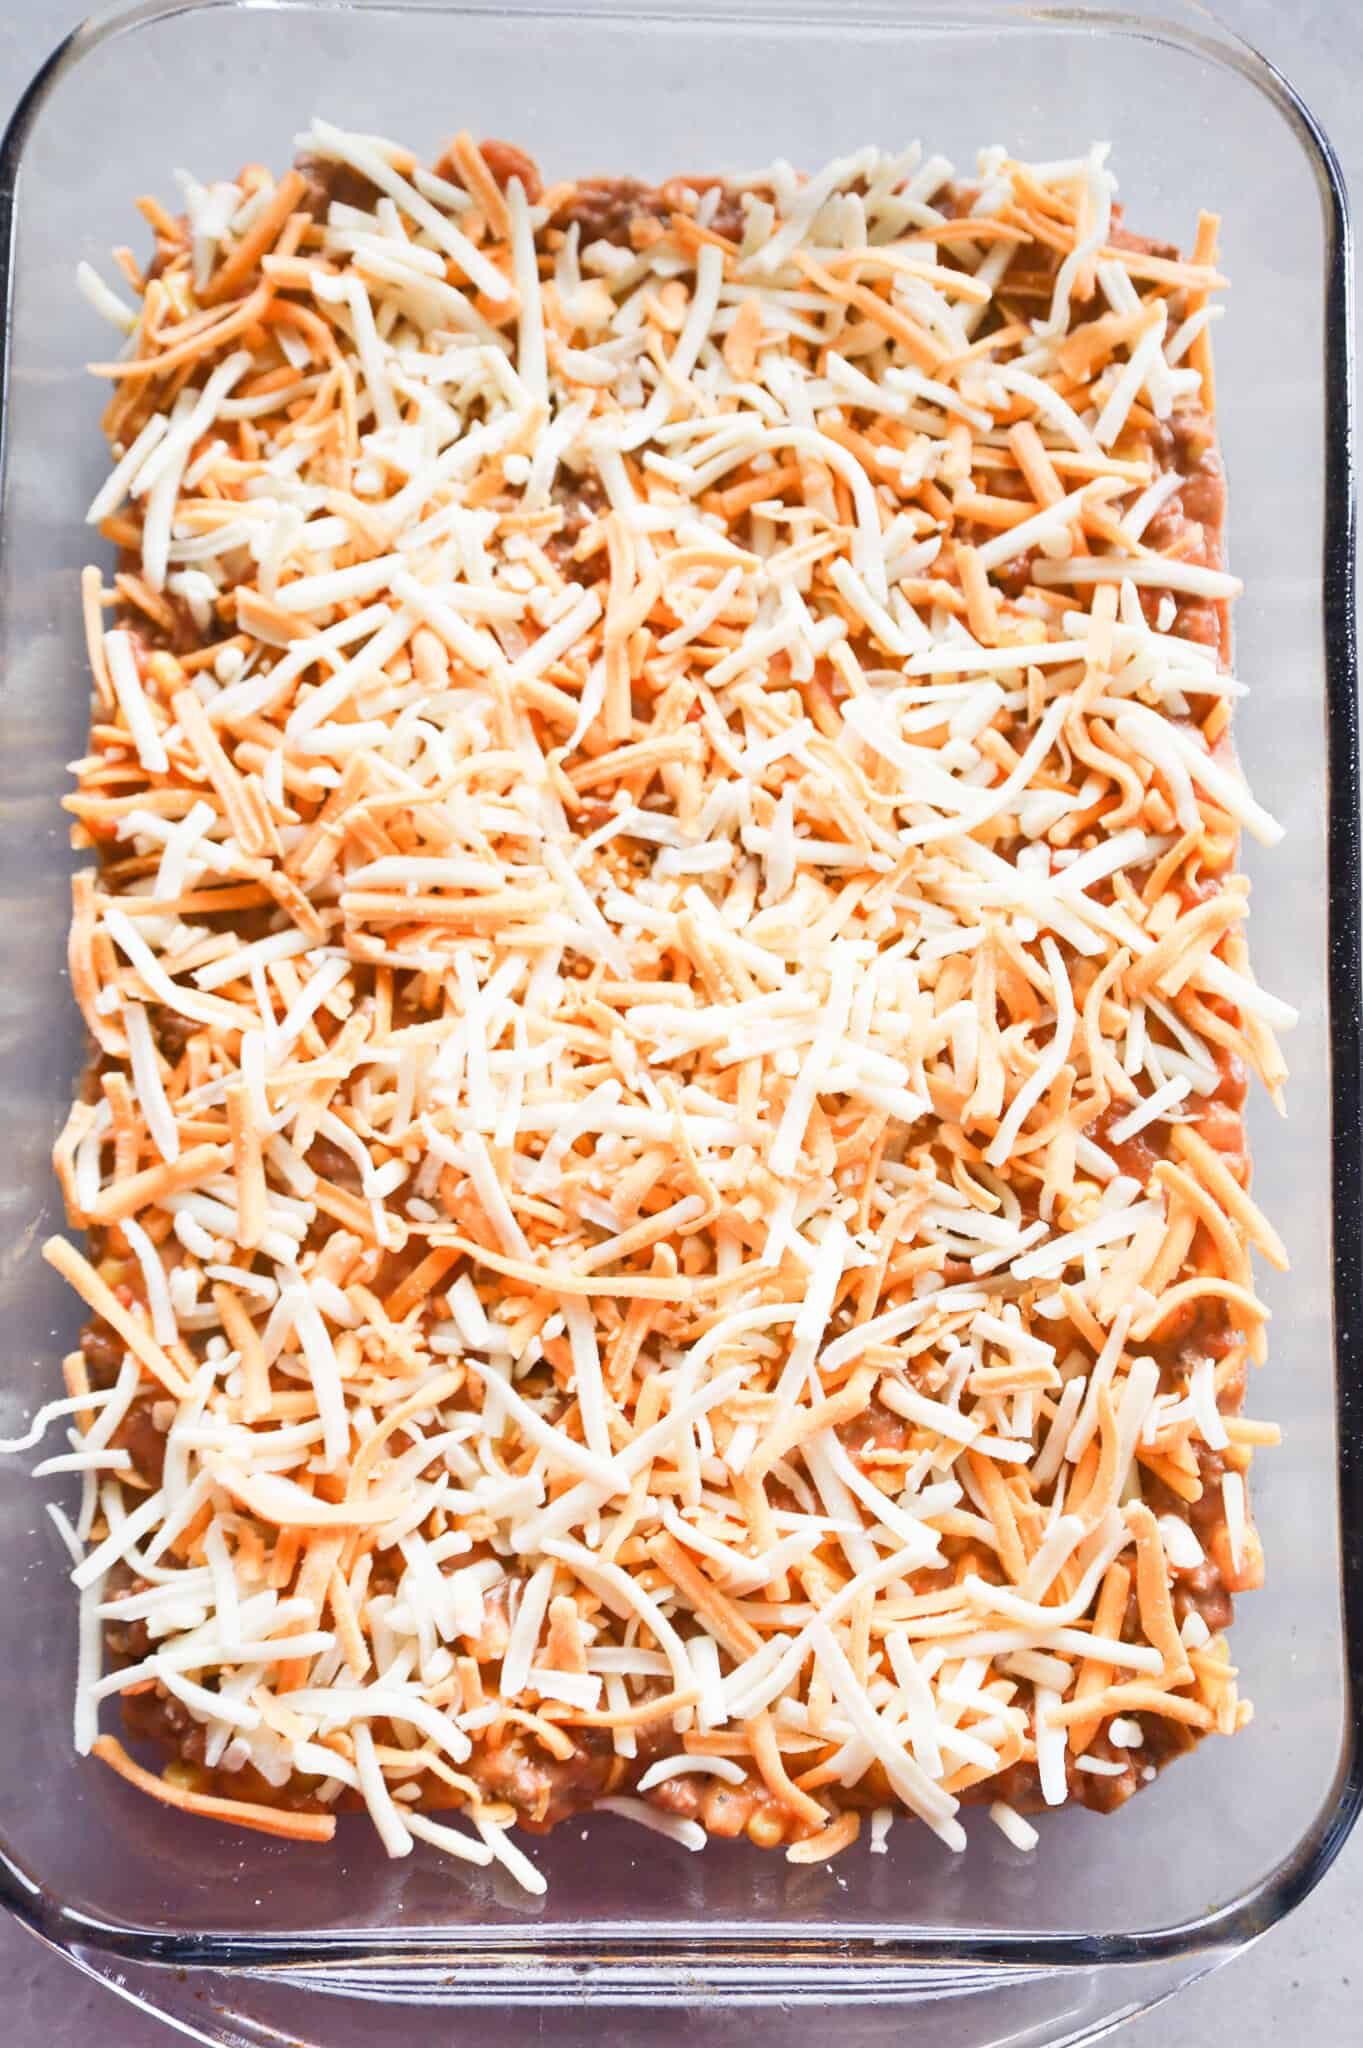 shredded cheese on top of ground beef mixture in a baking dish